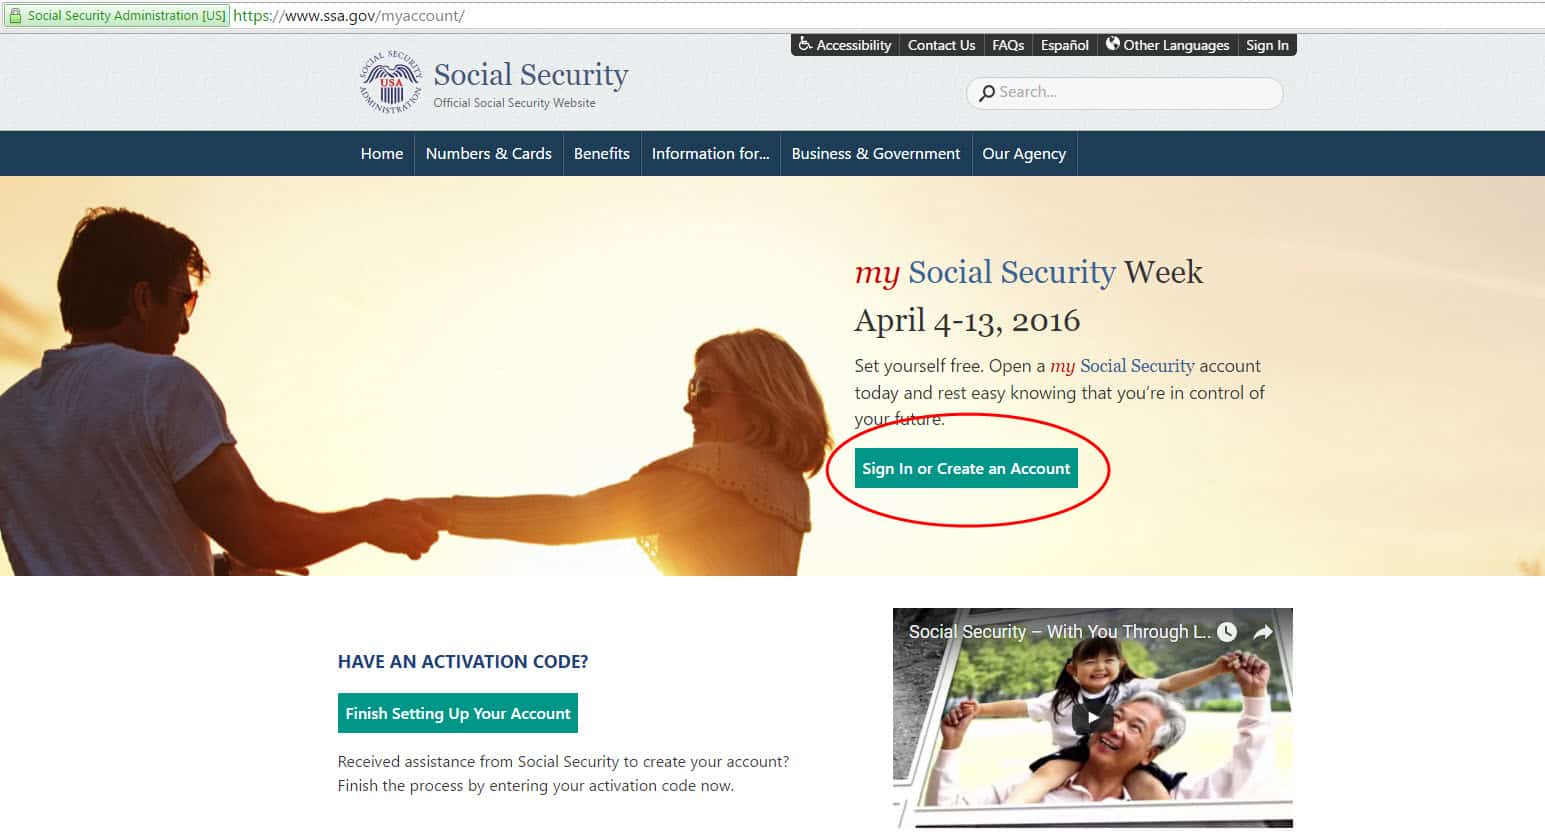 my social security account sign in page